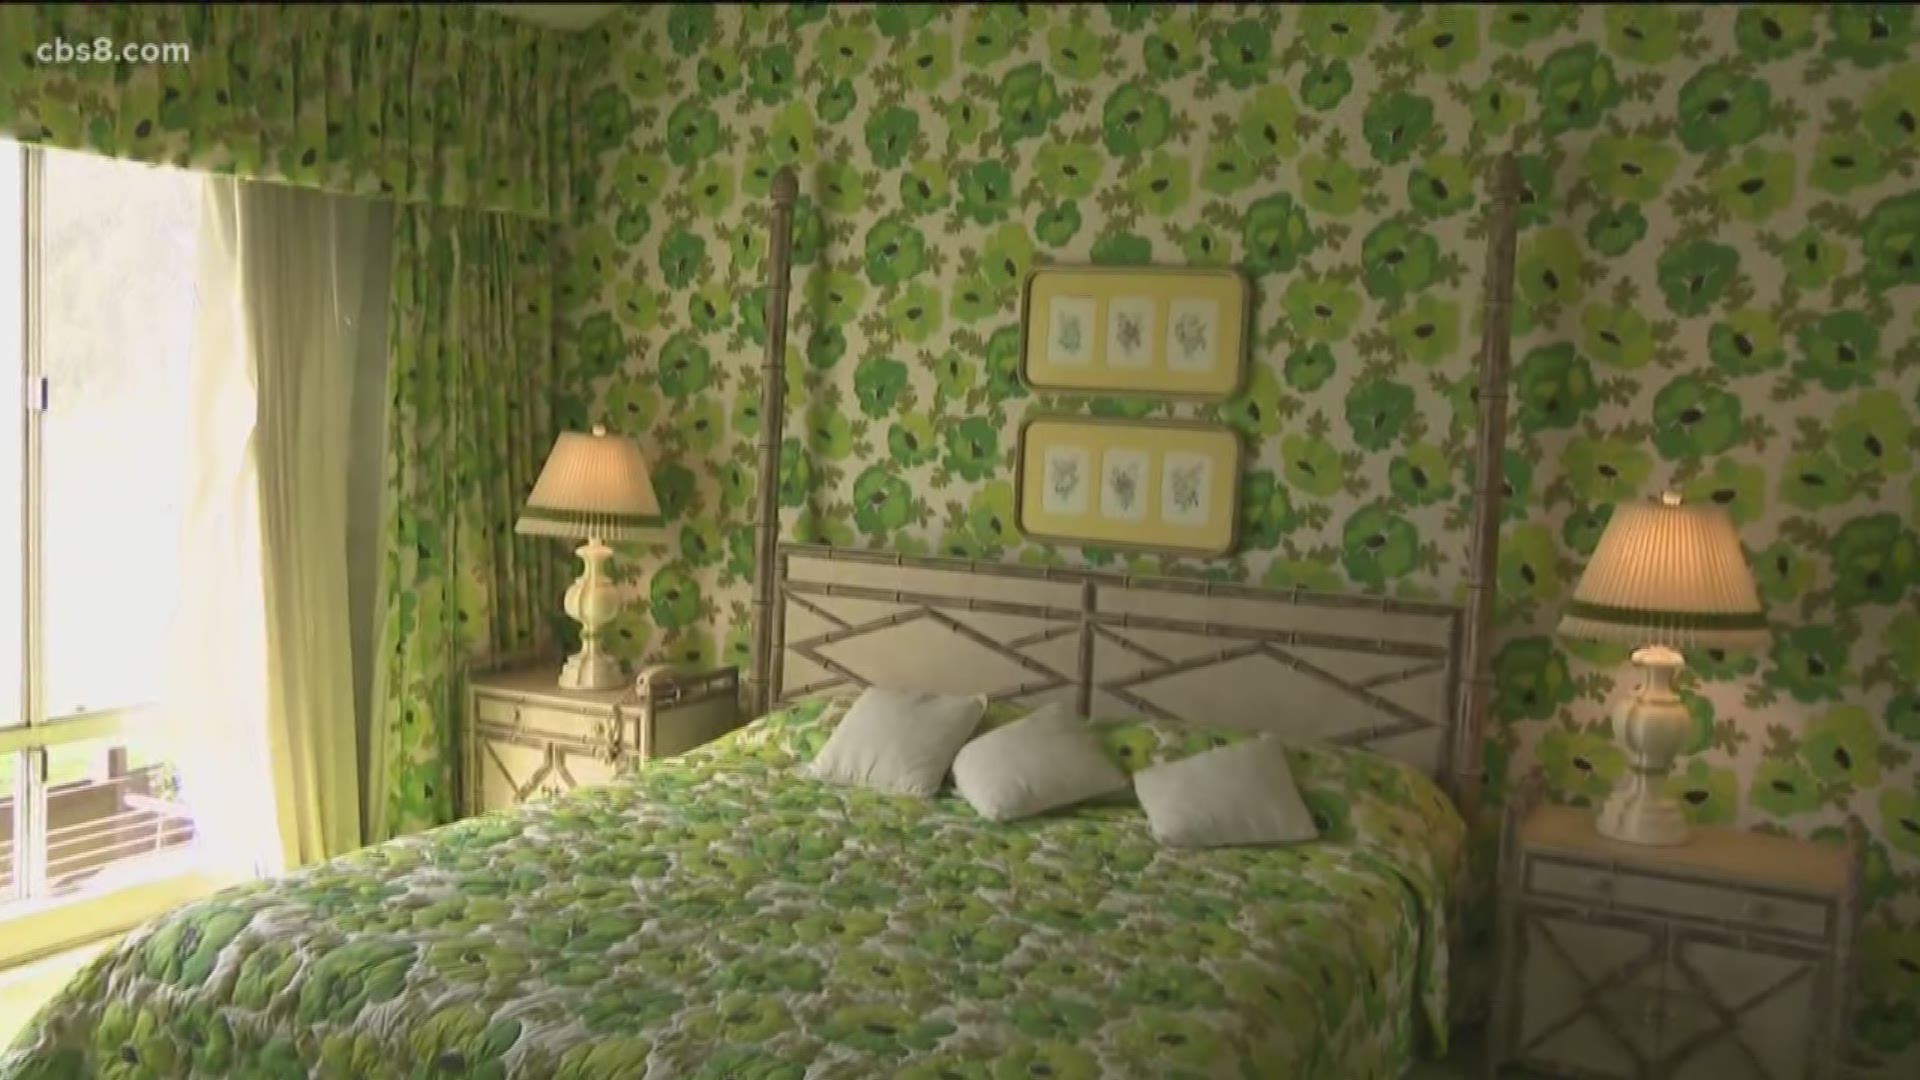 From green carpet to wallpaper, this house is a St. Patrick's Day lover's dream.